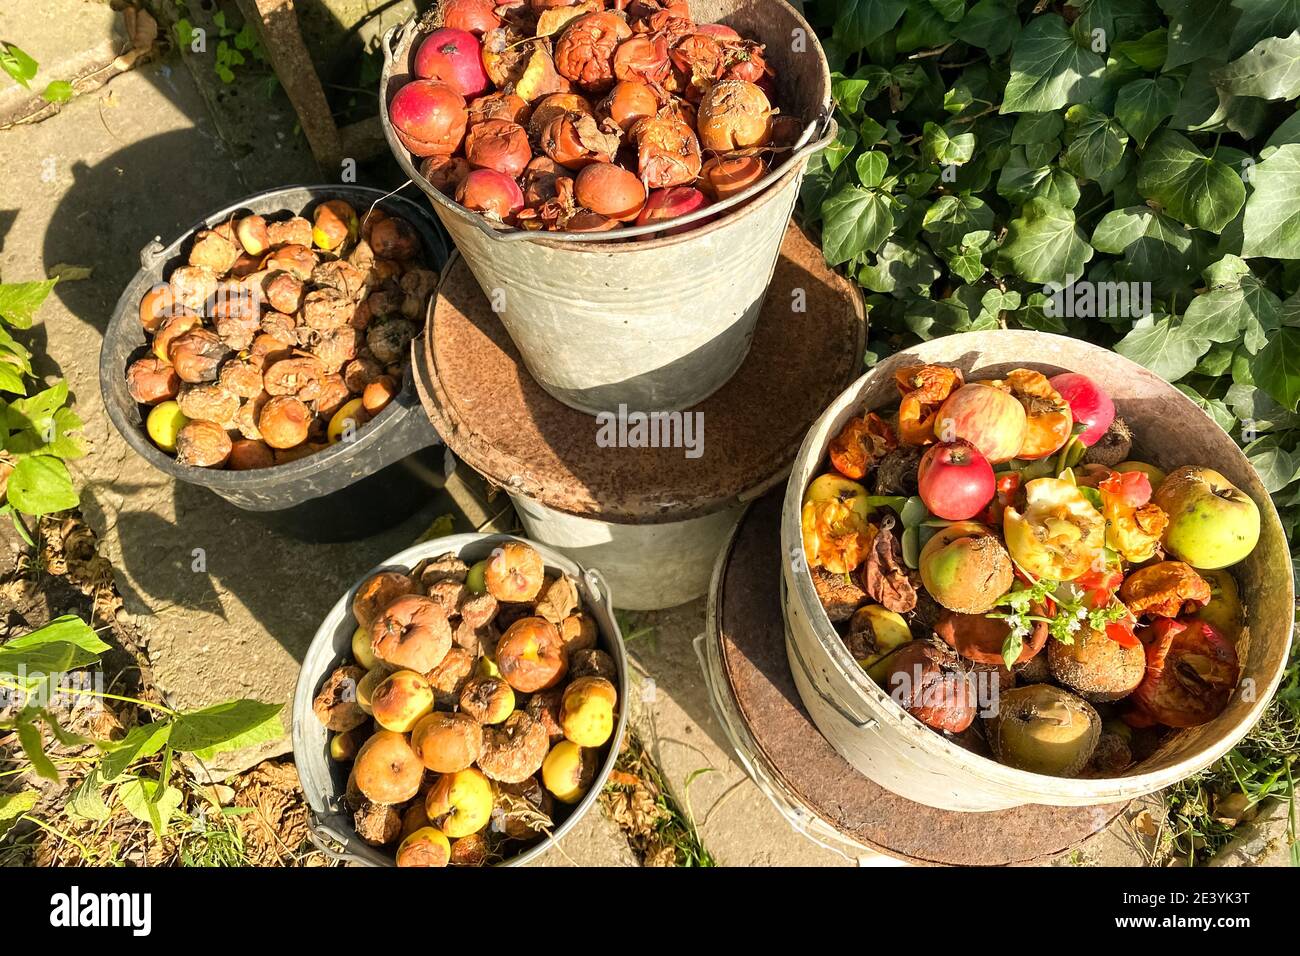 Organic biodegradable waste containers with food waste and vegetable leftovers, garden compost pit for making compost. Composting at home concept Stock Photo